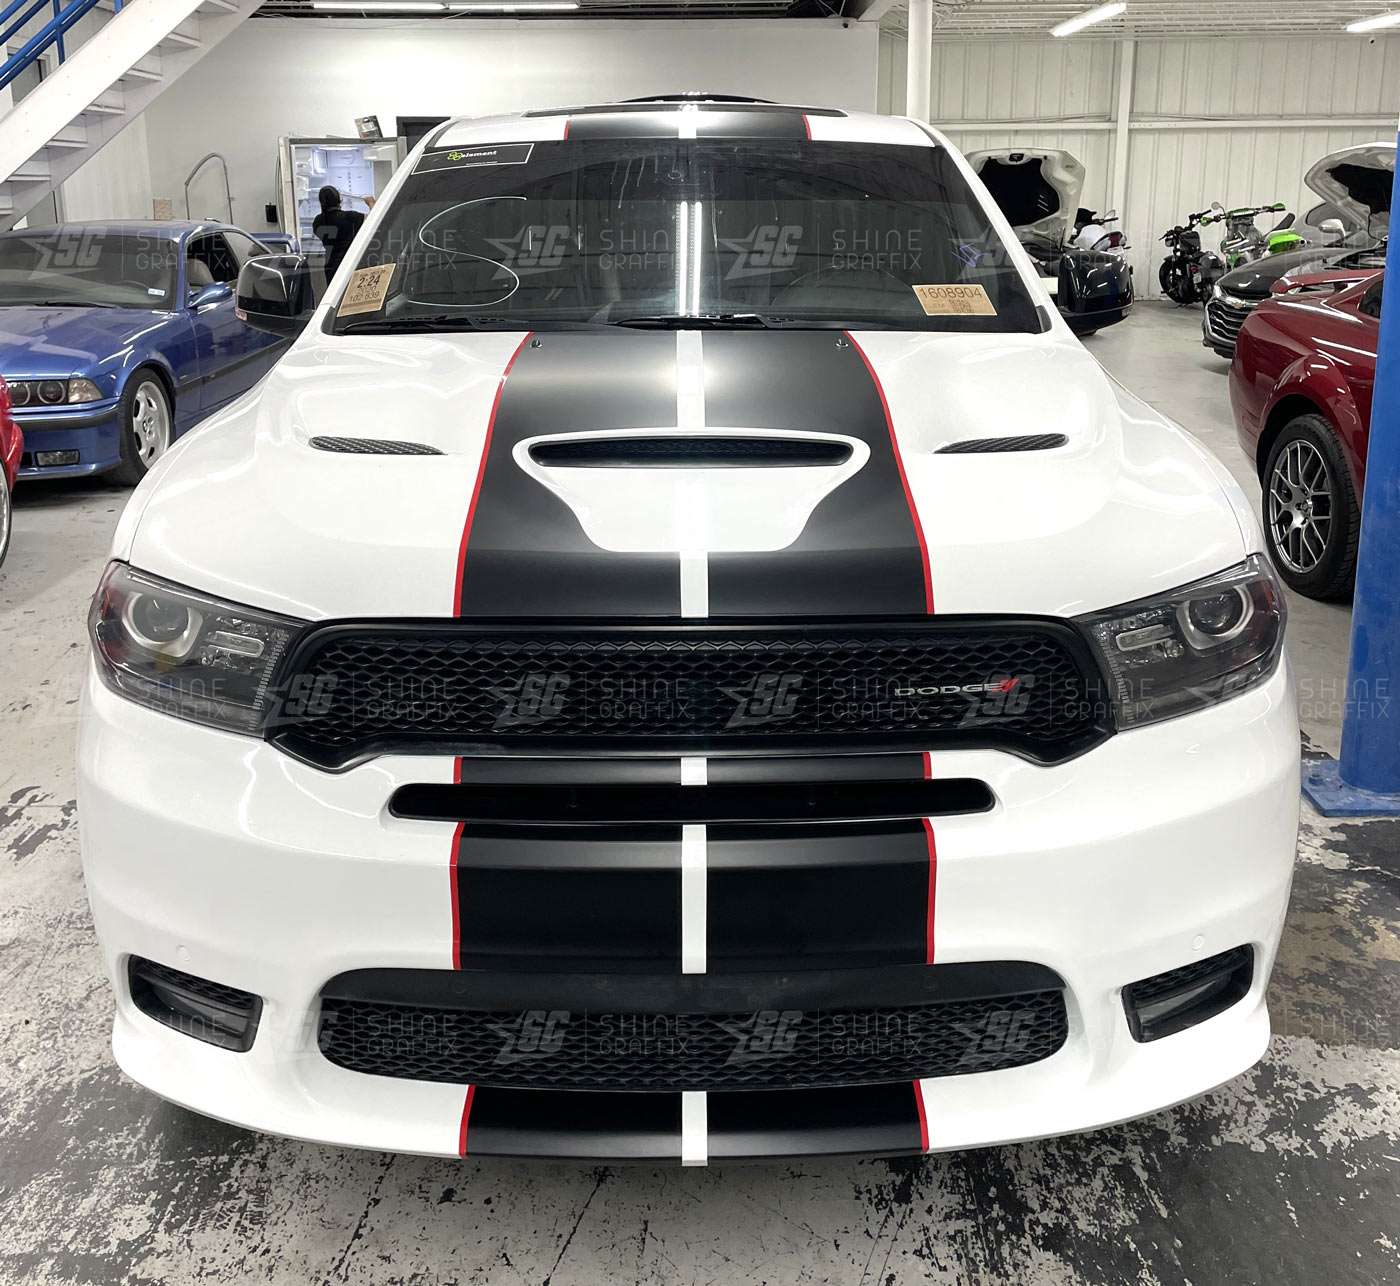 Dodge Durango 11in racing stripes black and red pinstripes